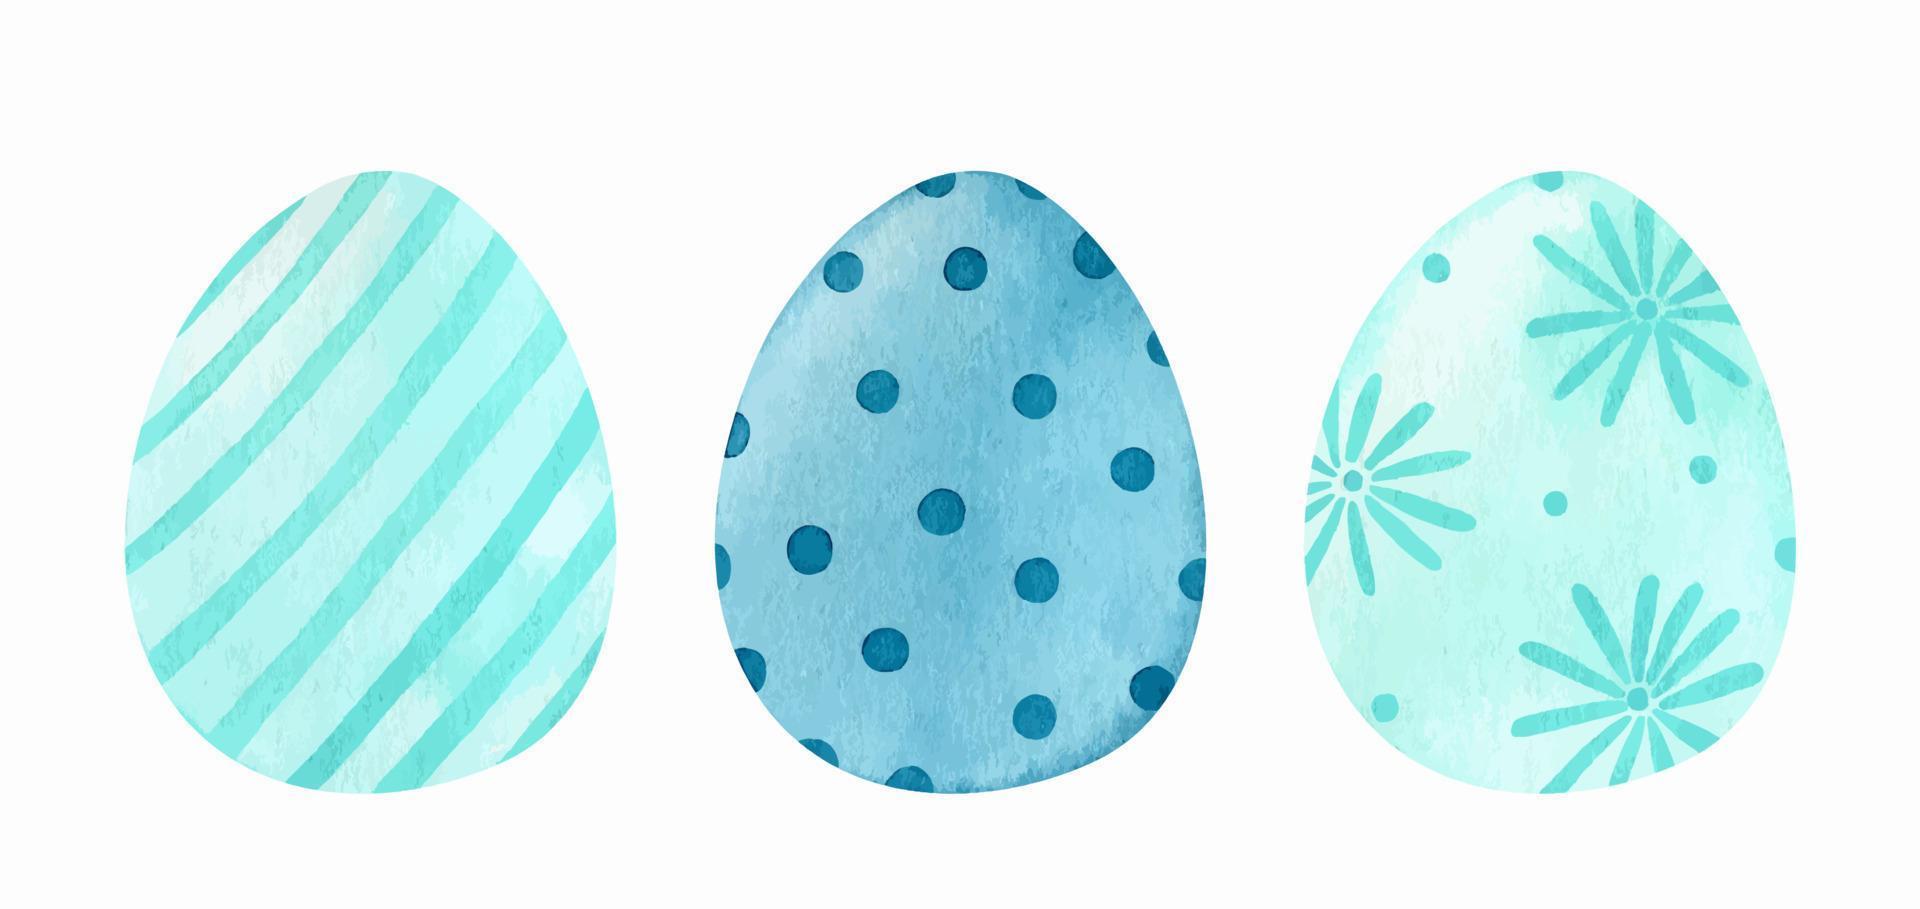 Watercolor set with decorated Easter eggs in blue colors vector